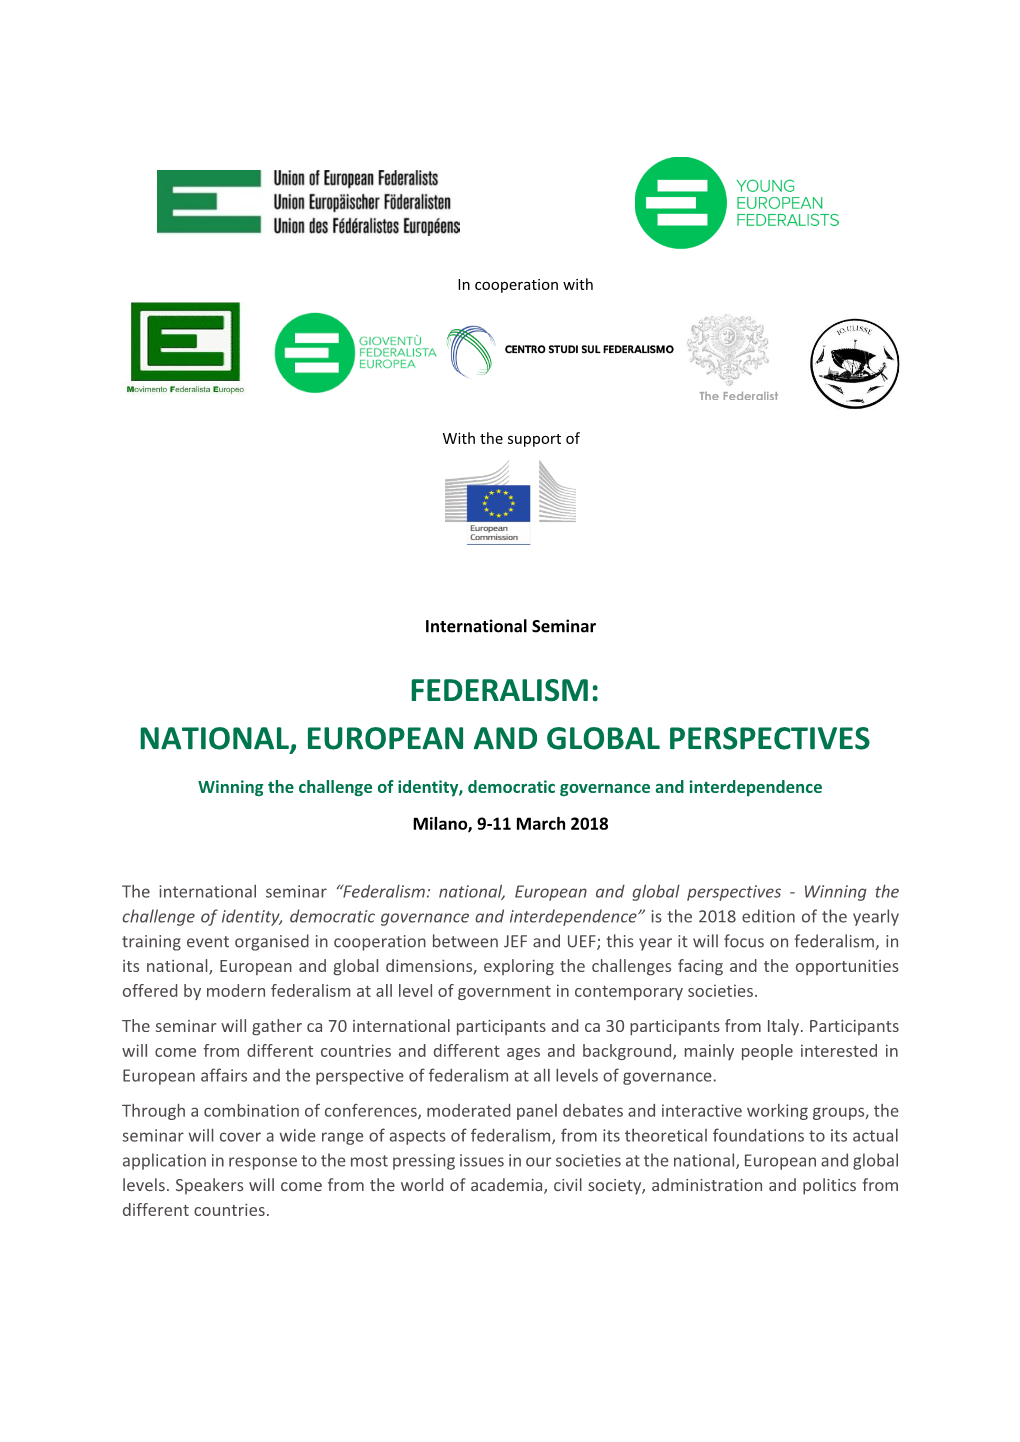 Federalism: National, European and Global Perspectives